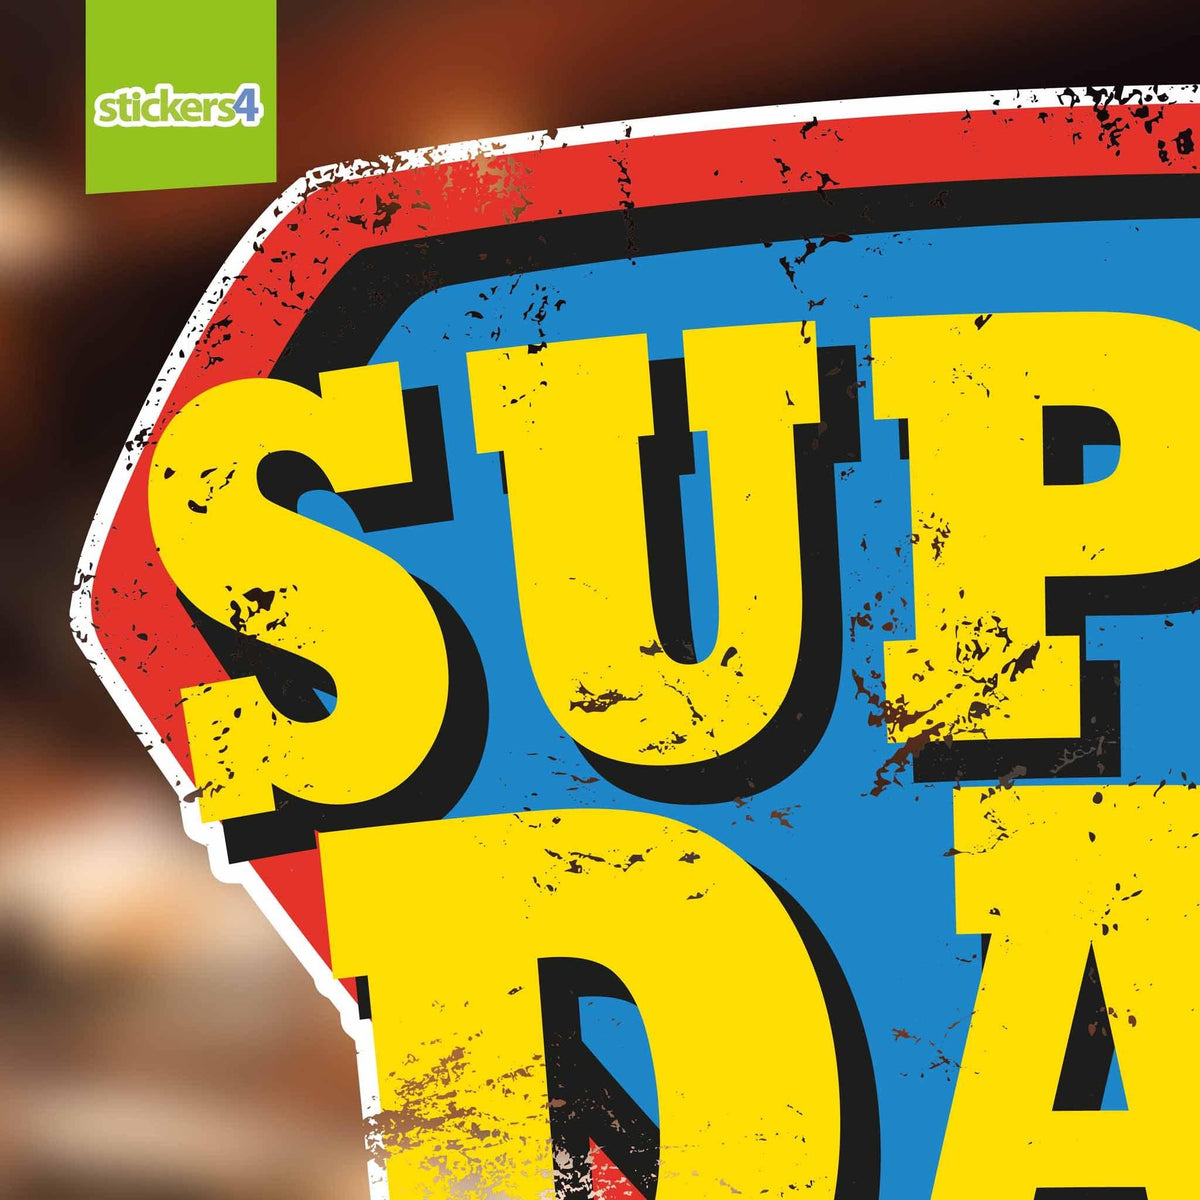 Super Dad Father&#39;s Day Window Cling Sticker (Vintage Style)